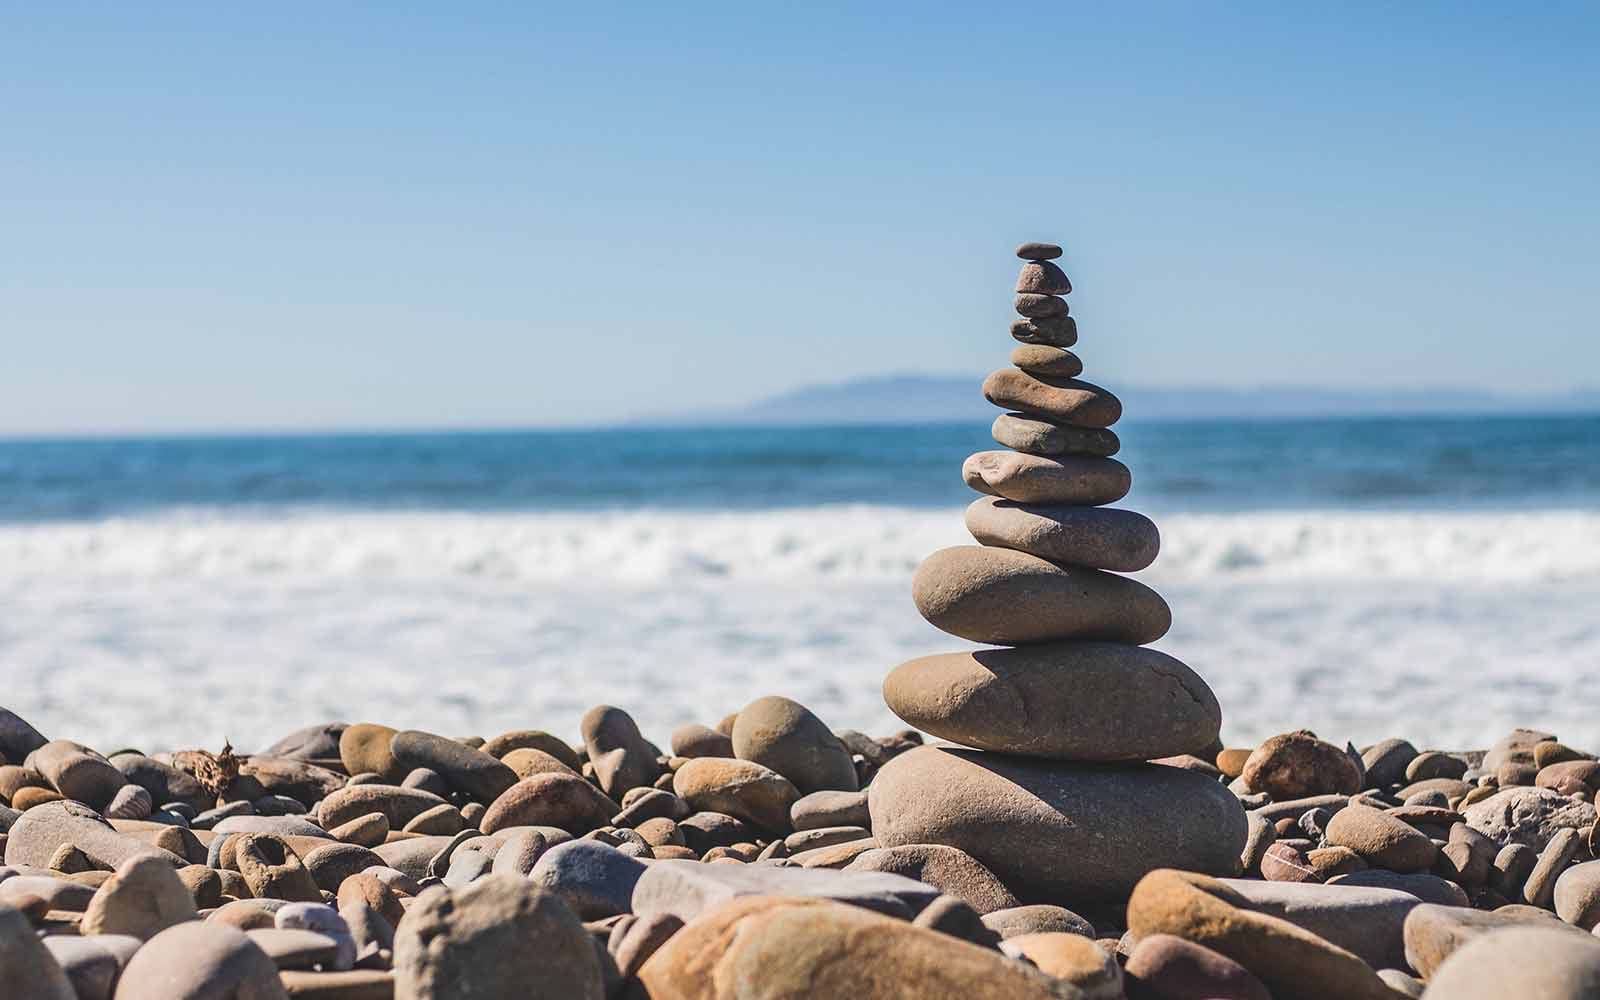 Smooth stones stacked in a pile on shore